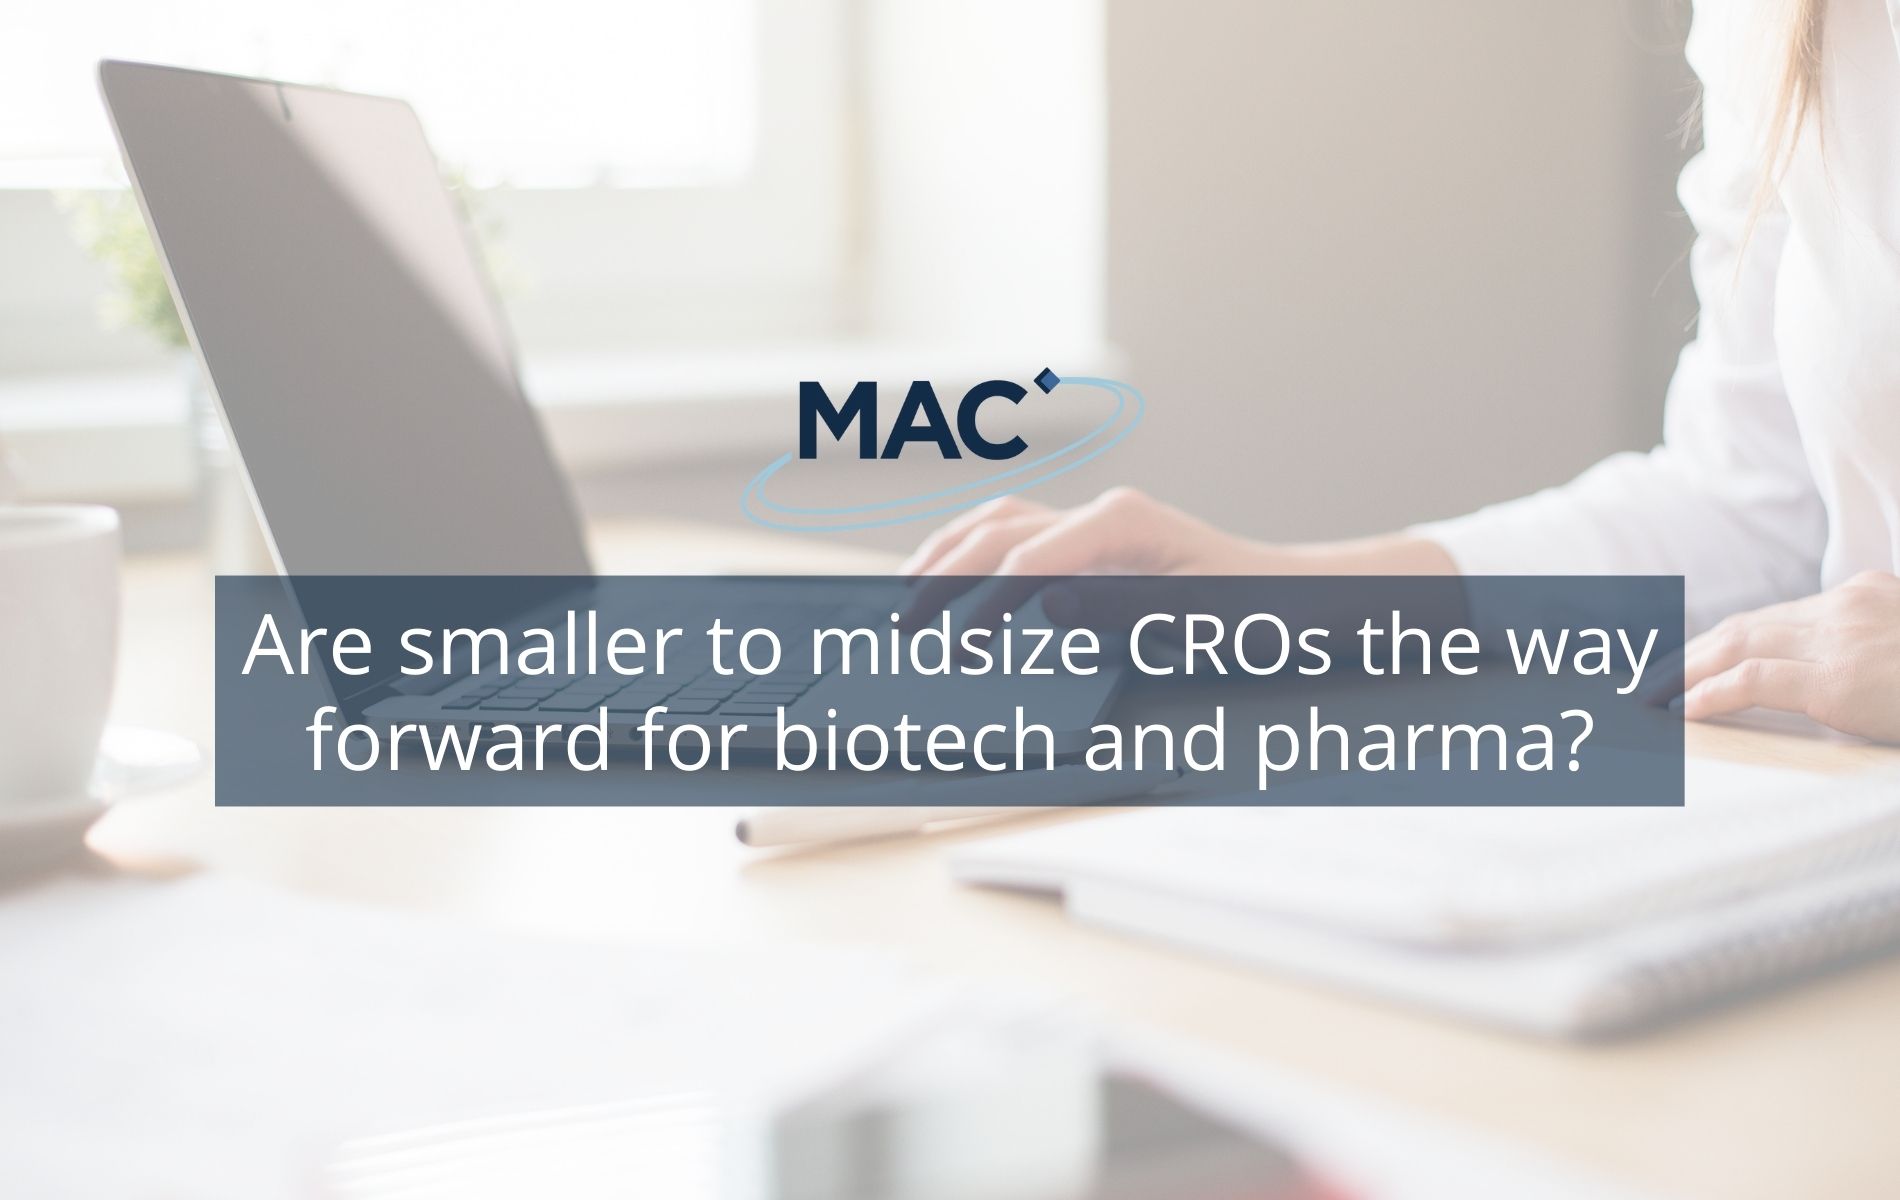 Are smaller to midsize Clinical Research Organisations (CROs) the way forward for biotech and pharma